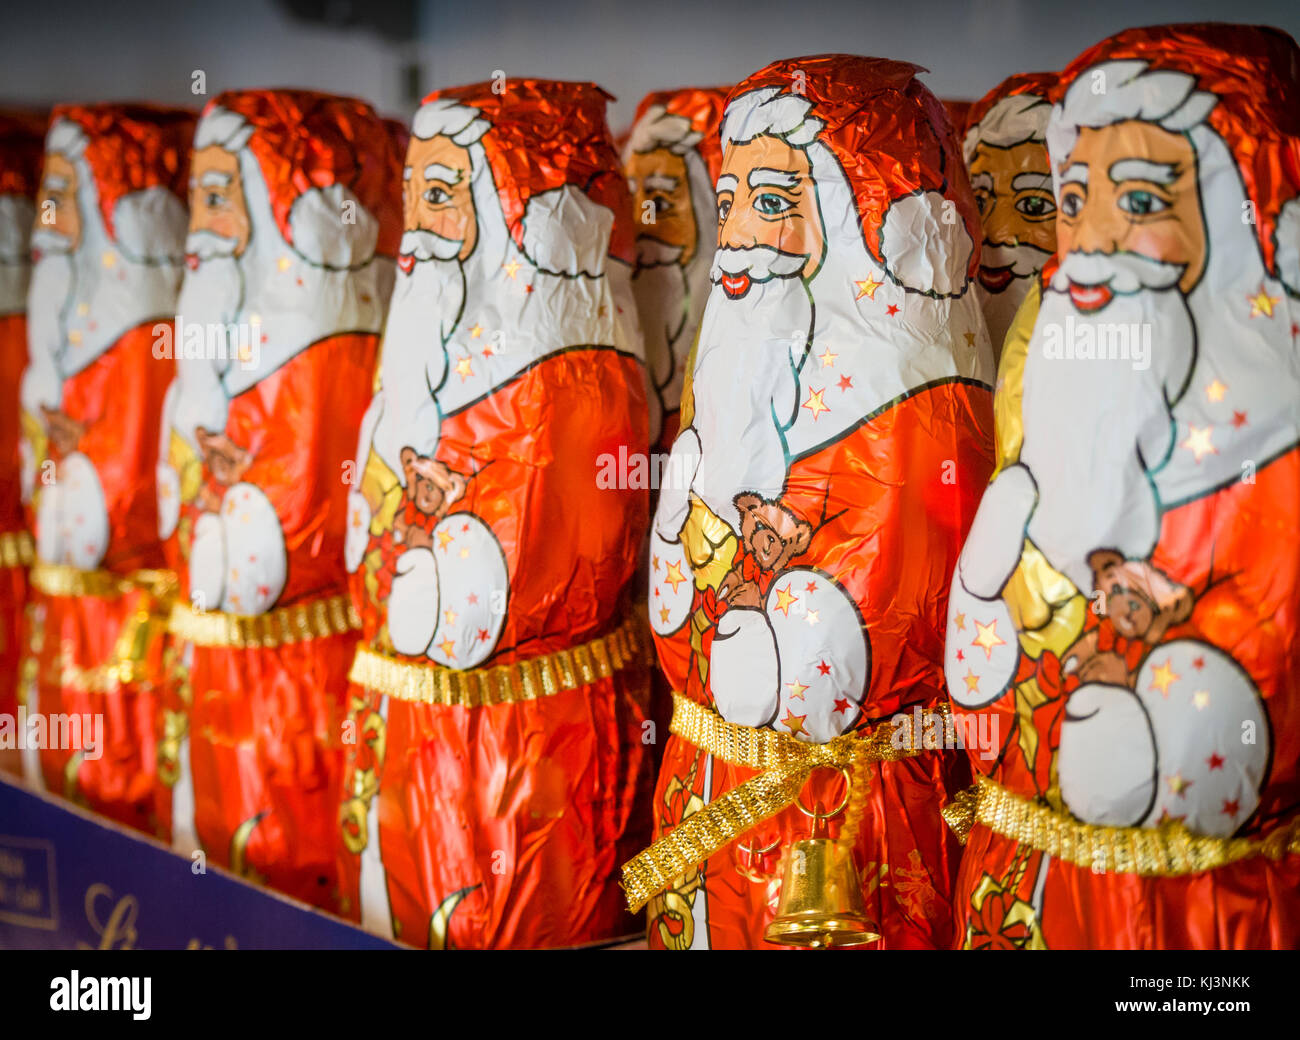 Zurich, Switzerland - 17 Nov 2017: Less than 6 weeks before Christmas, an army of chocolate Santa Clauses is lined up on a supermarket shelf. Stock Photo